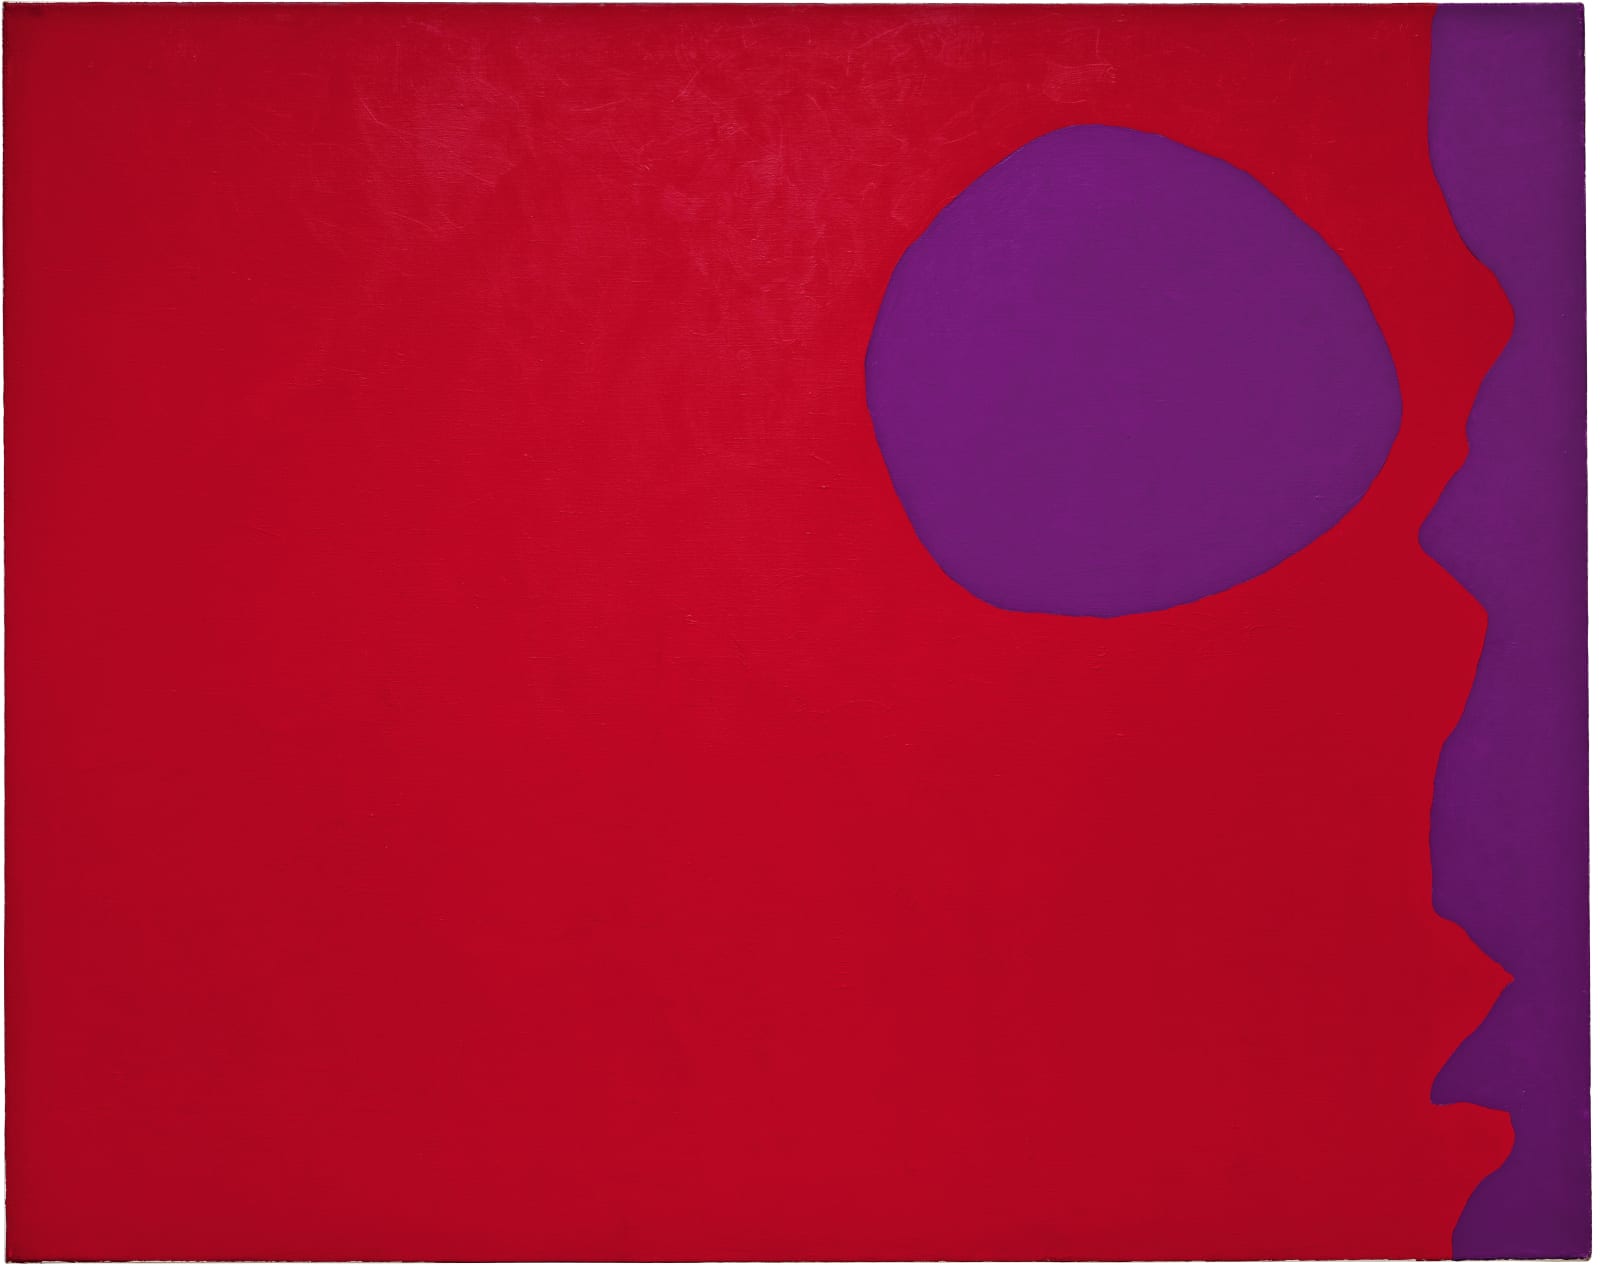 Violet and Dark Red : 1969